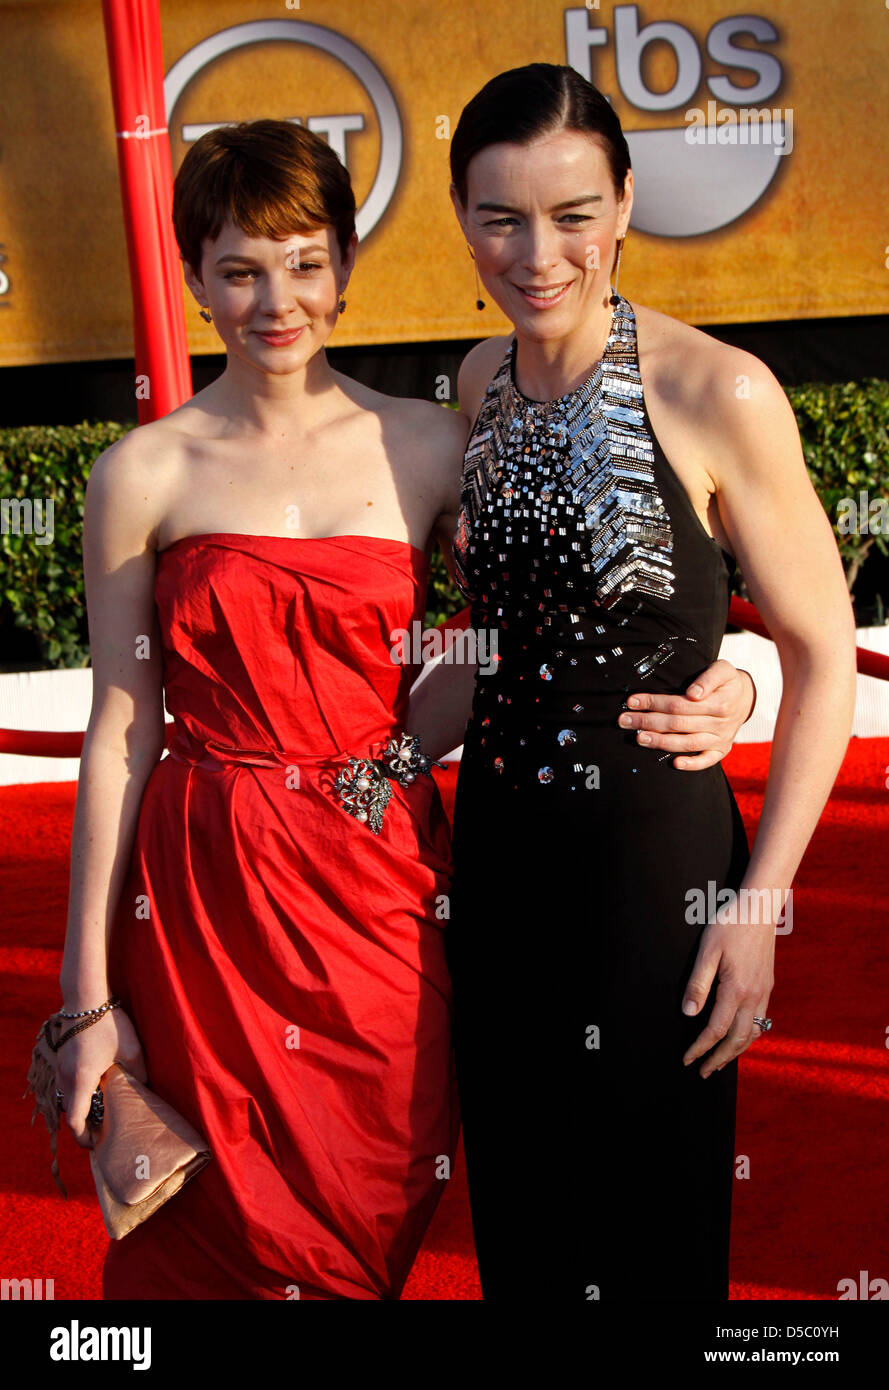 British actresses Carey Mulligan and Olivia Williams (R) attend the 16th Annual Screen Actor's Guild (SAG) Awards at the Shrine Auditorium in Los Angeles, California, USA, 23 January 2010. The Screen Actors Guild honours excellence in five film and eight prime time television categories. Photo: Hubert Boesl Stock Photo